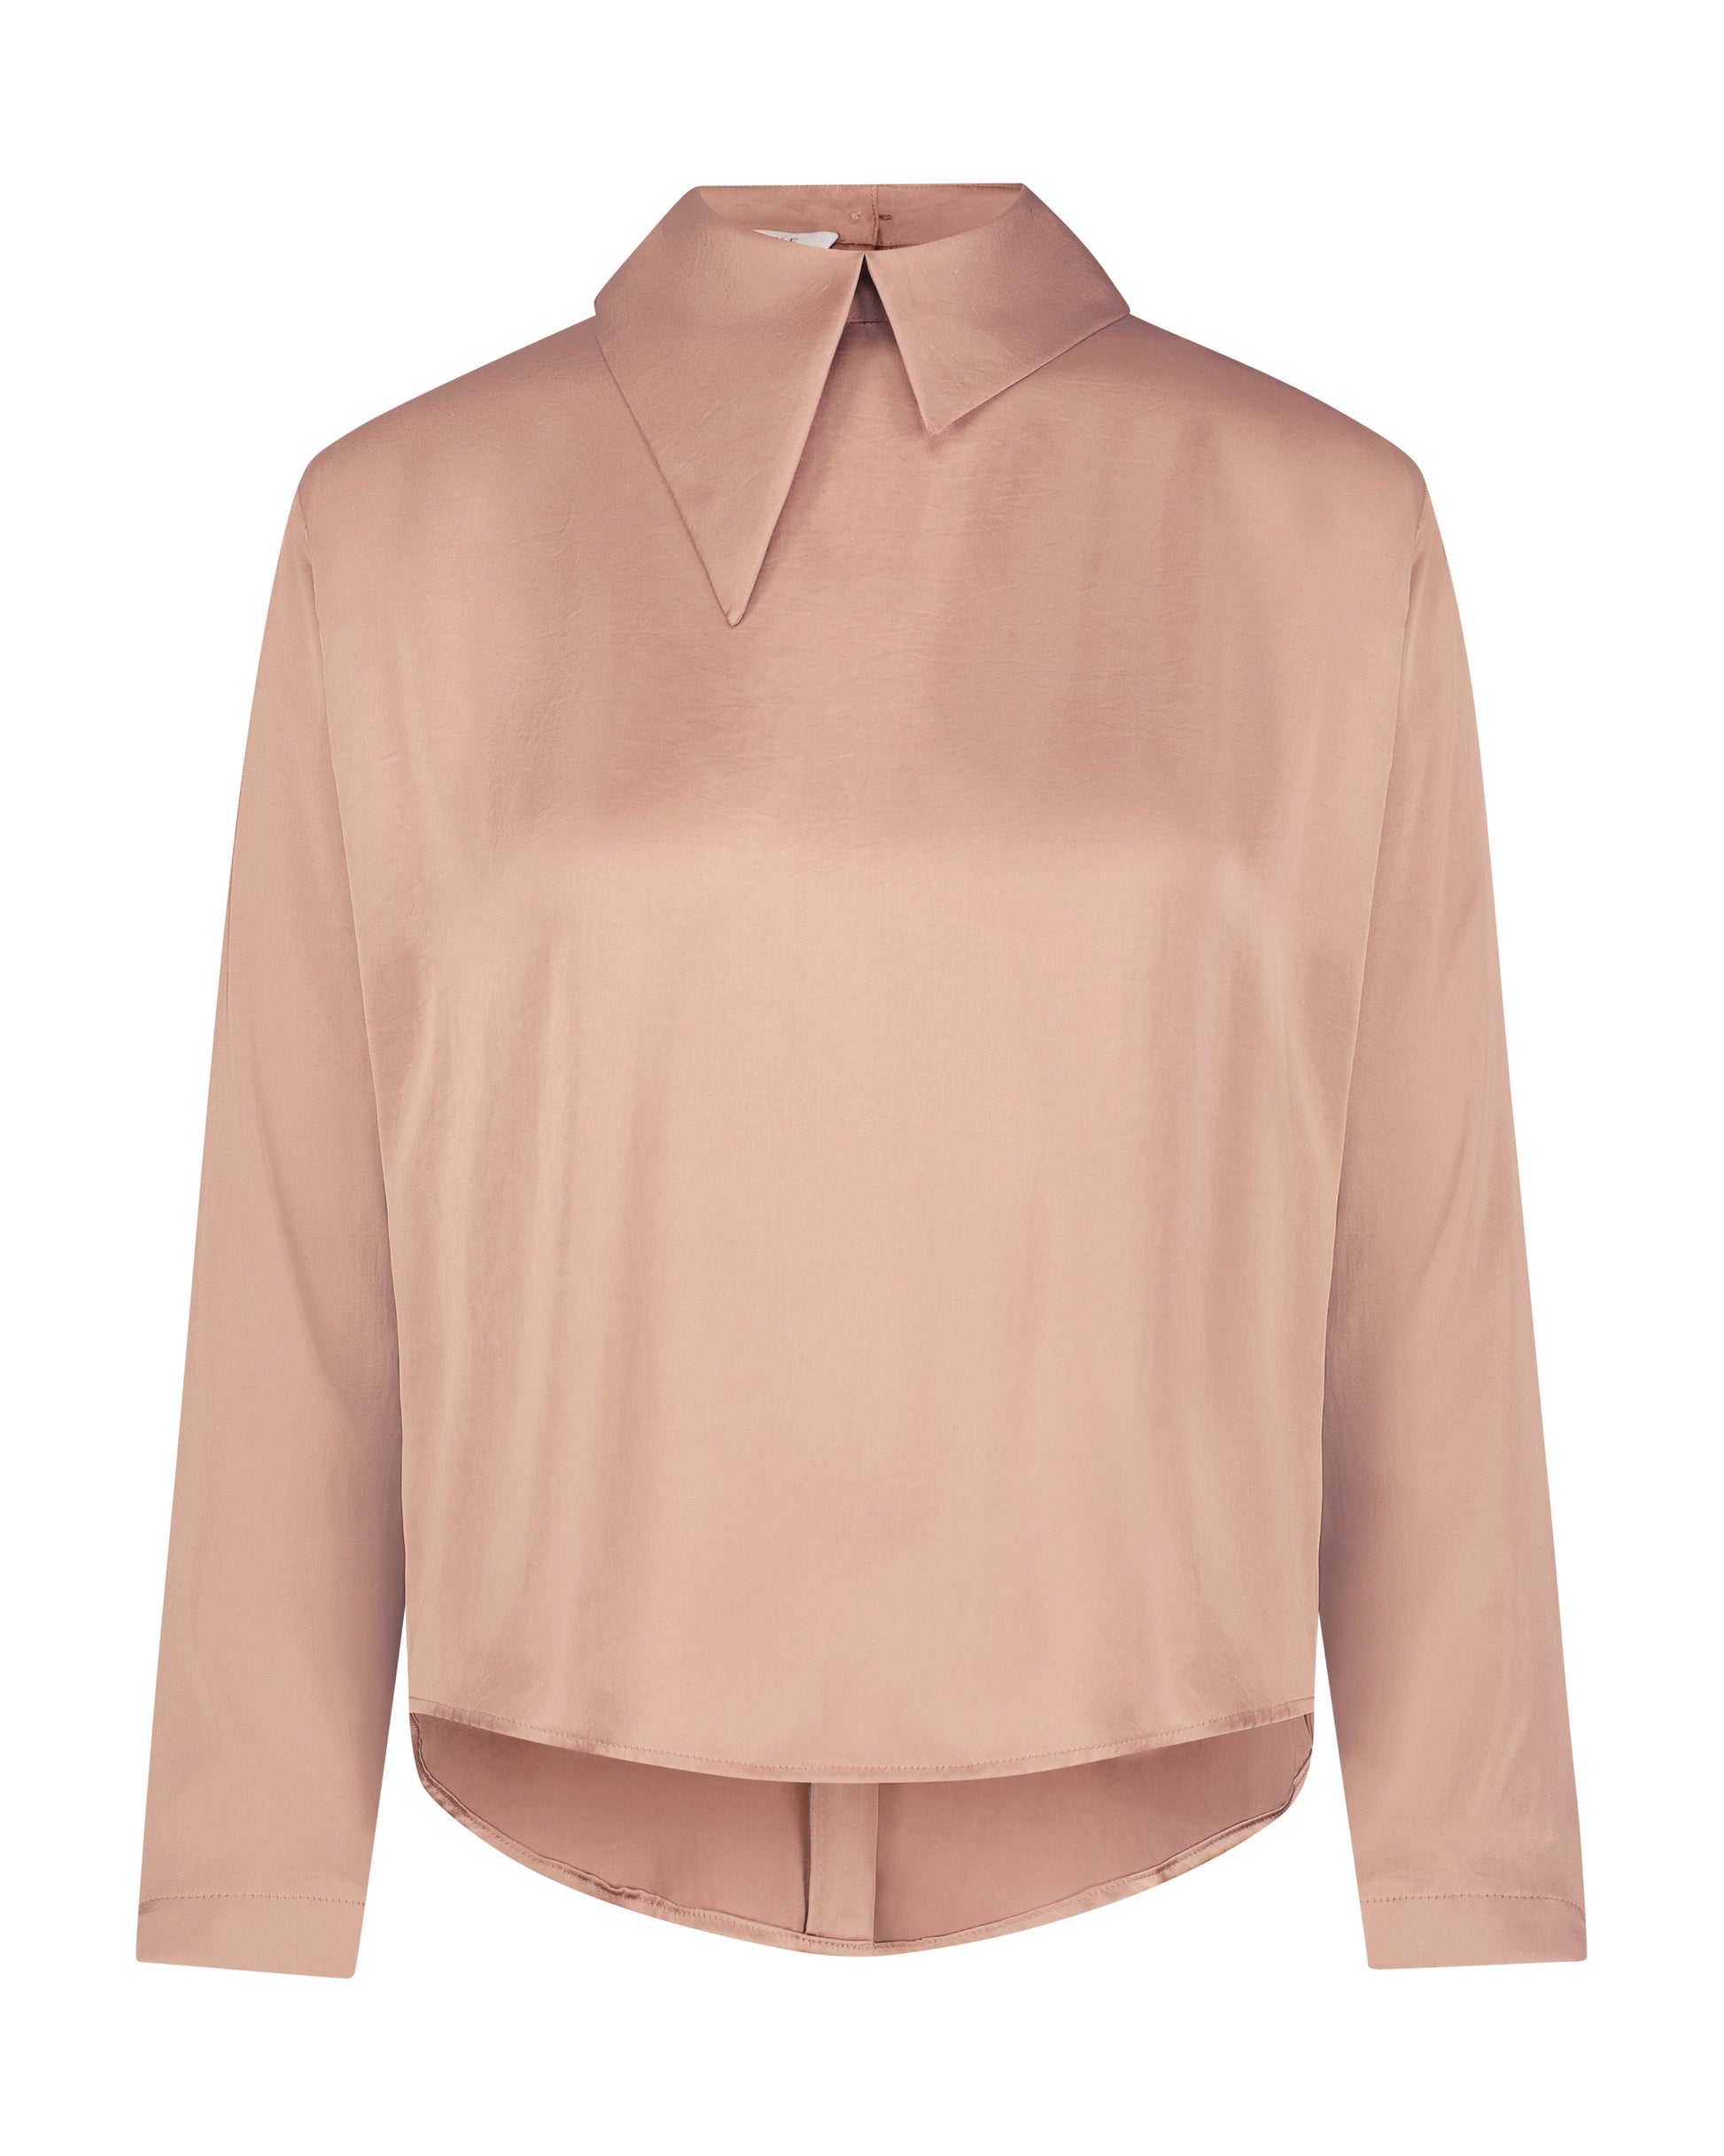 Joy Blouse in Japanese Charmeuse Tops CHRISTINE ALCALAY   